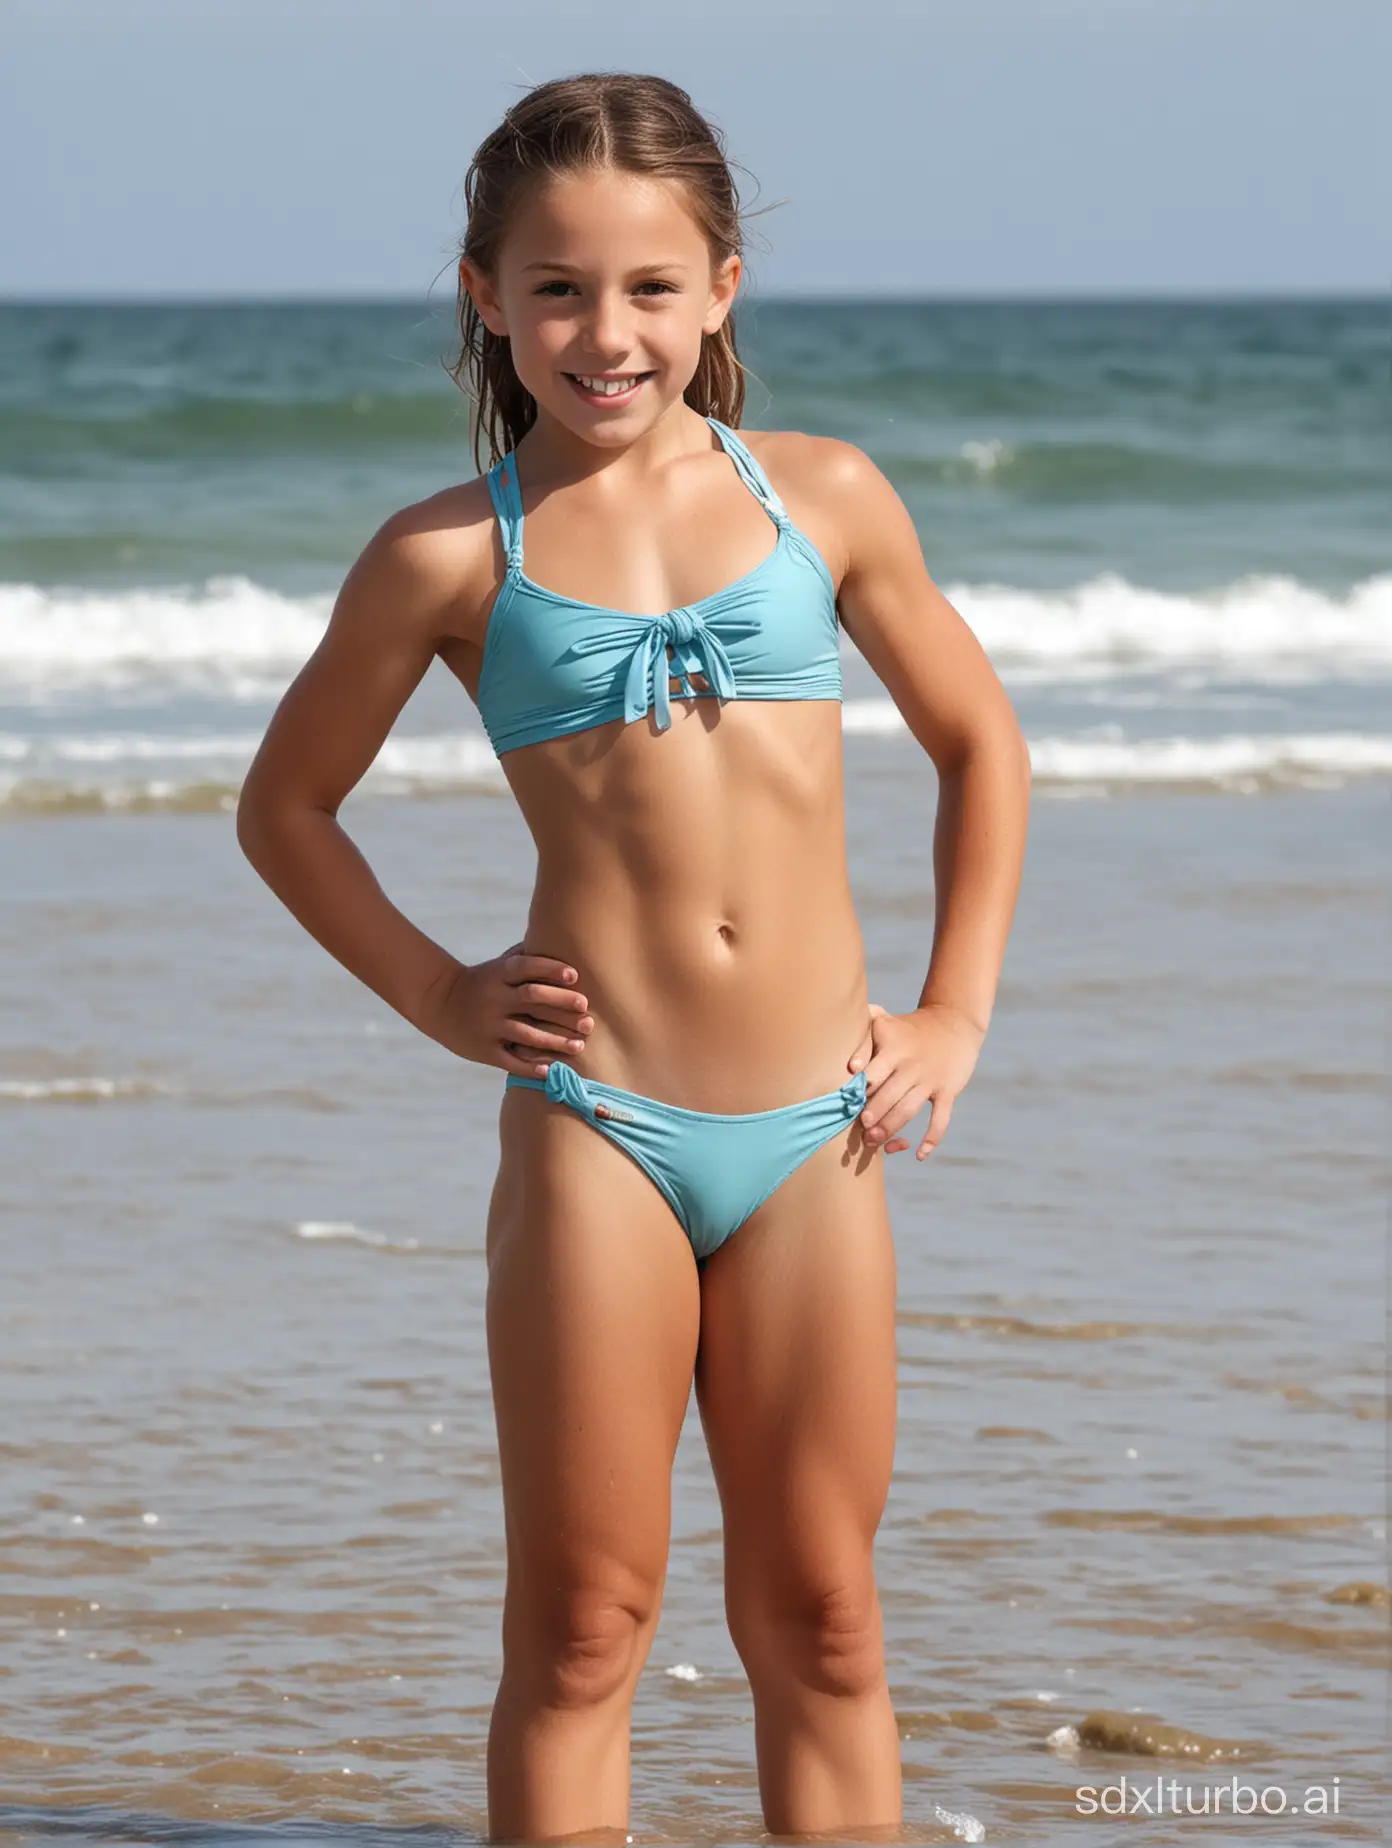 Caitlin Clark at 8 years old, flat-chested, muscular abs, string swimsuit at the beach